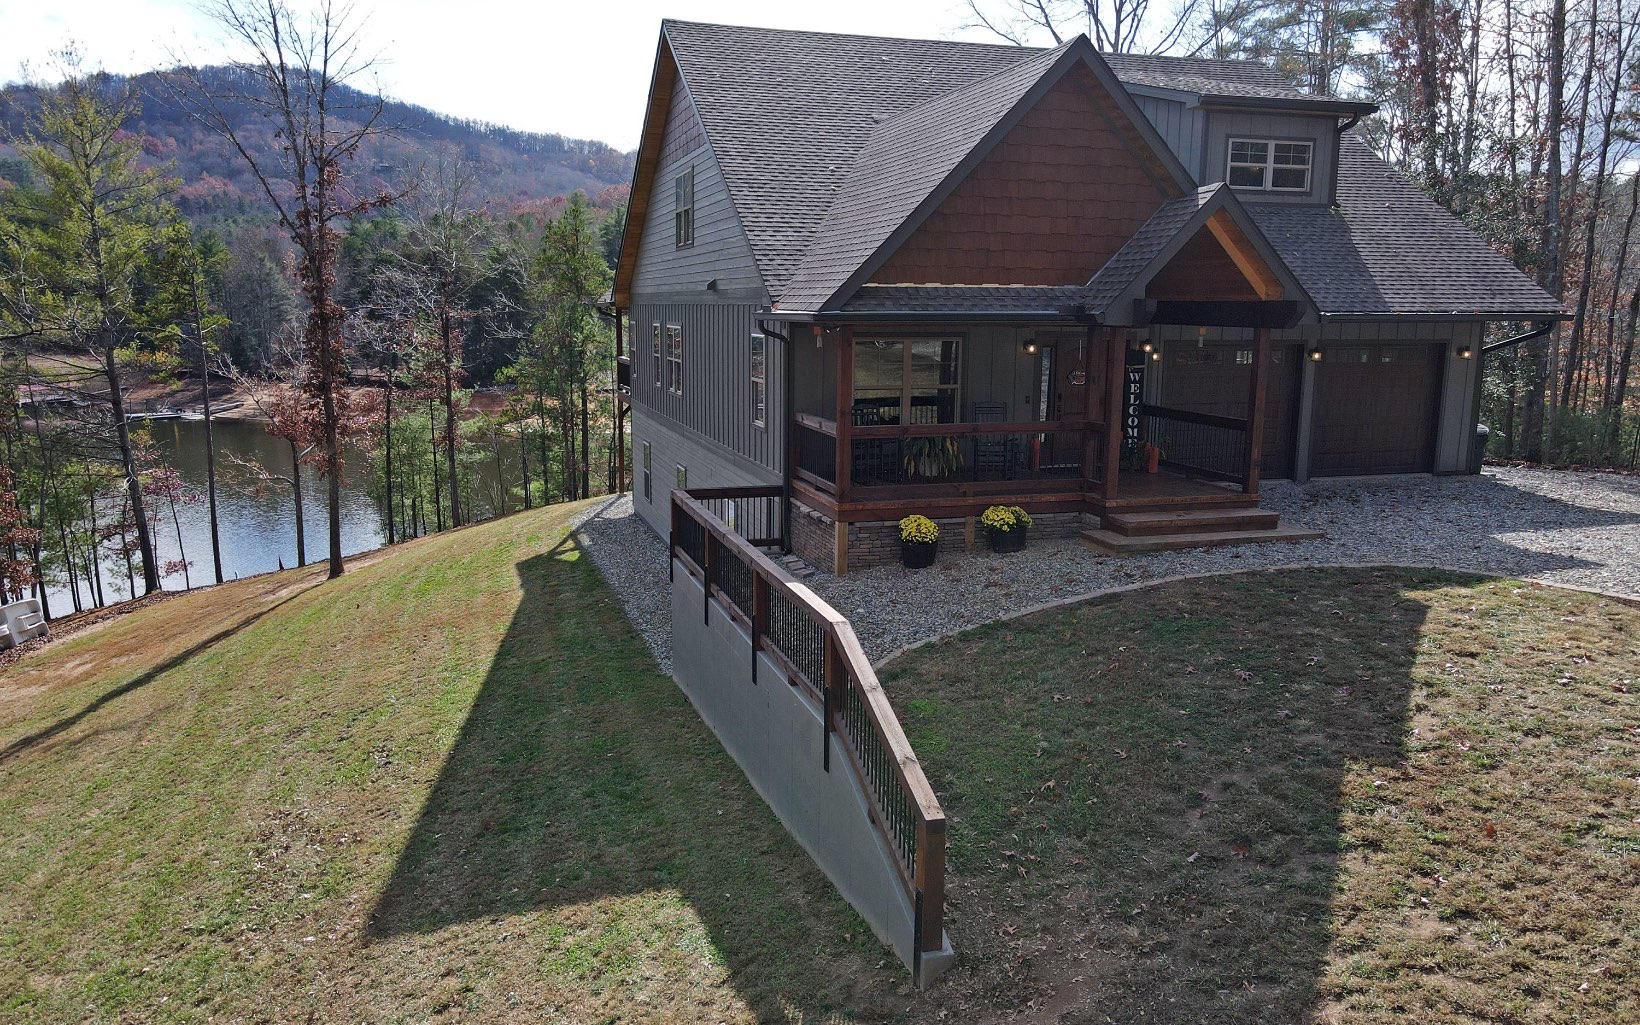 Beautifully upgraded LAKE HOME in Blairsville sits right on Lake Nottely with year-round deep water. Ample lake frontage on .87 acre lot. 3 bedrooms, 2.5 baths, designated home office w/ fiber optic, two car garage, laundry room, bonus room, and full basement. Great room with abundant windows offers gorgeous lake views, stone fireplace with ventless gas logs, cathedral ceiling, engineered wood floors, and spacious dining area. Kitchen has a sizable pantry, center island, stainless steel appliances, & elegant leathered granite. Nine ft. ceilings. Let your imagination explore the possibilities when finishing out terrace level, which is stubbed for bath. Conveniently located to Blairsville. Dual heat with four climate controlled zones. Some outlets and appliances are Smart enabled. Foam insulation. Exquisite quality throughout this summer or permanent home.